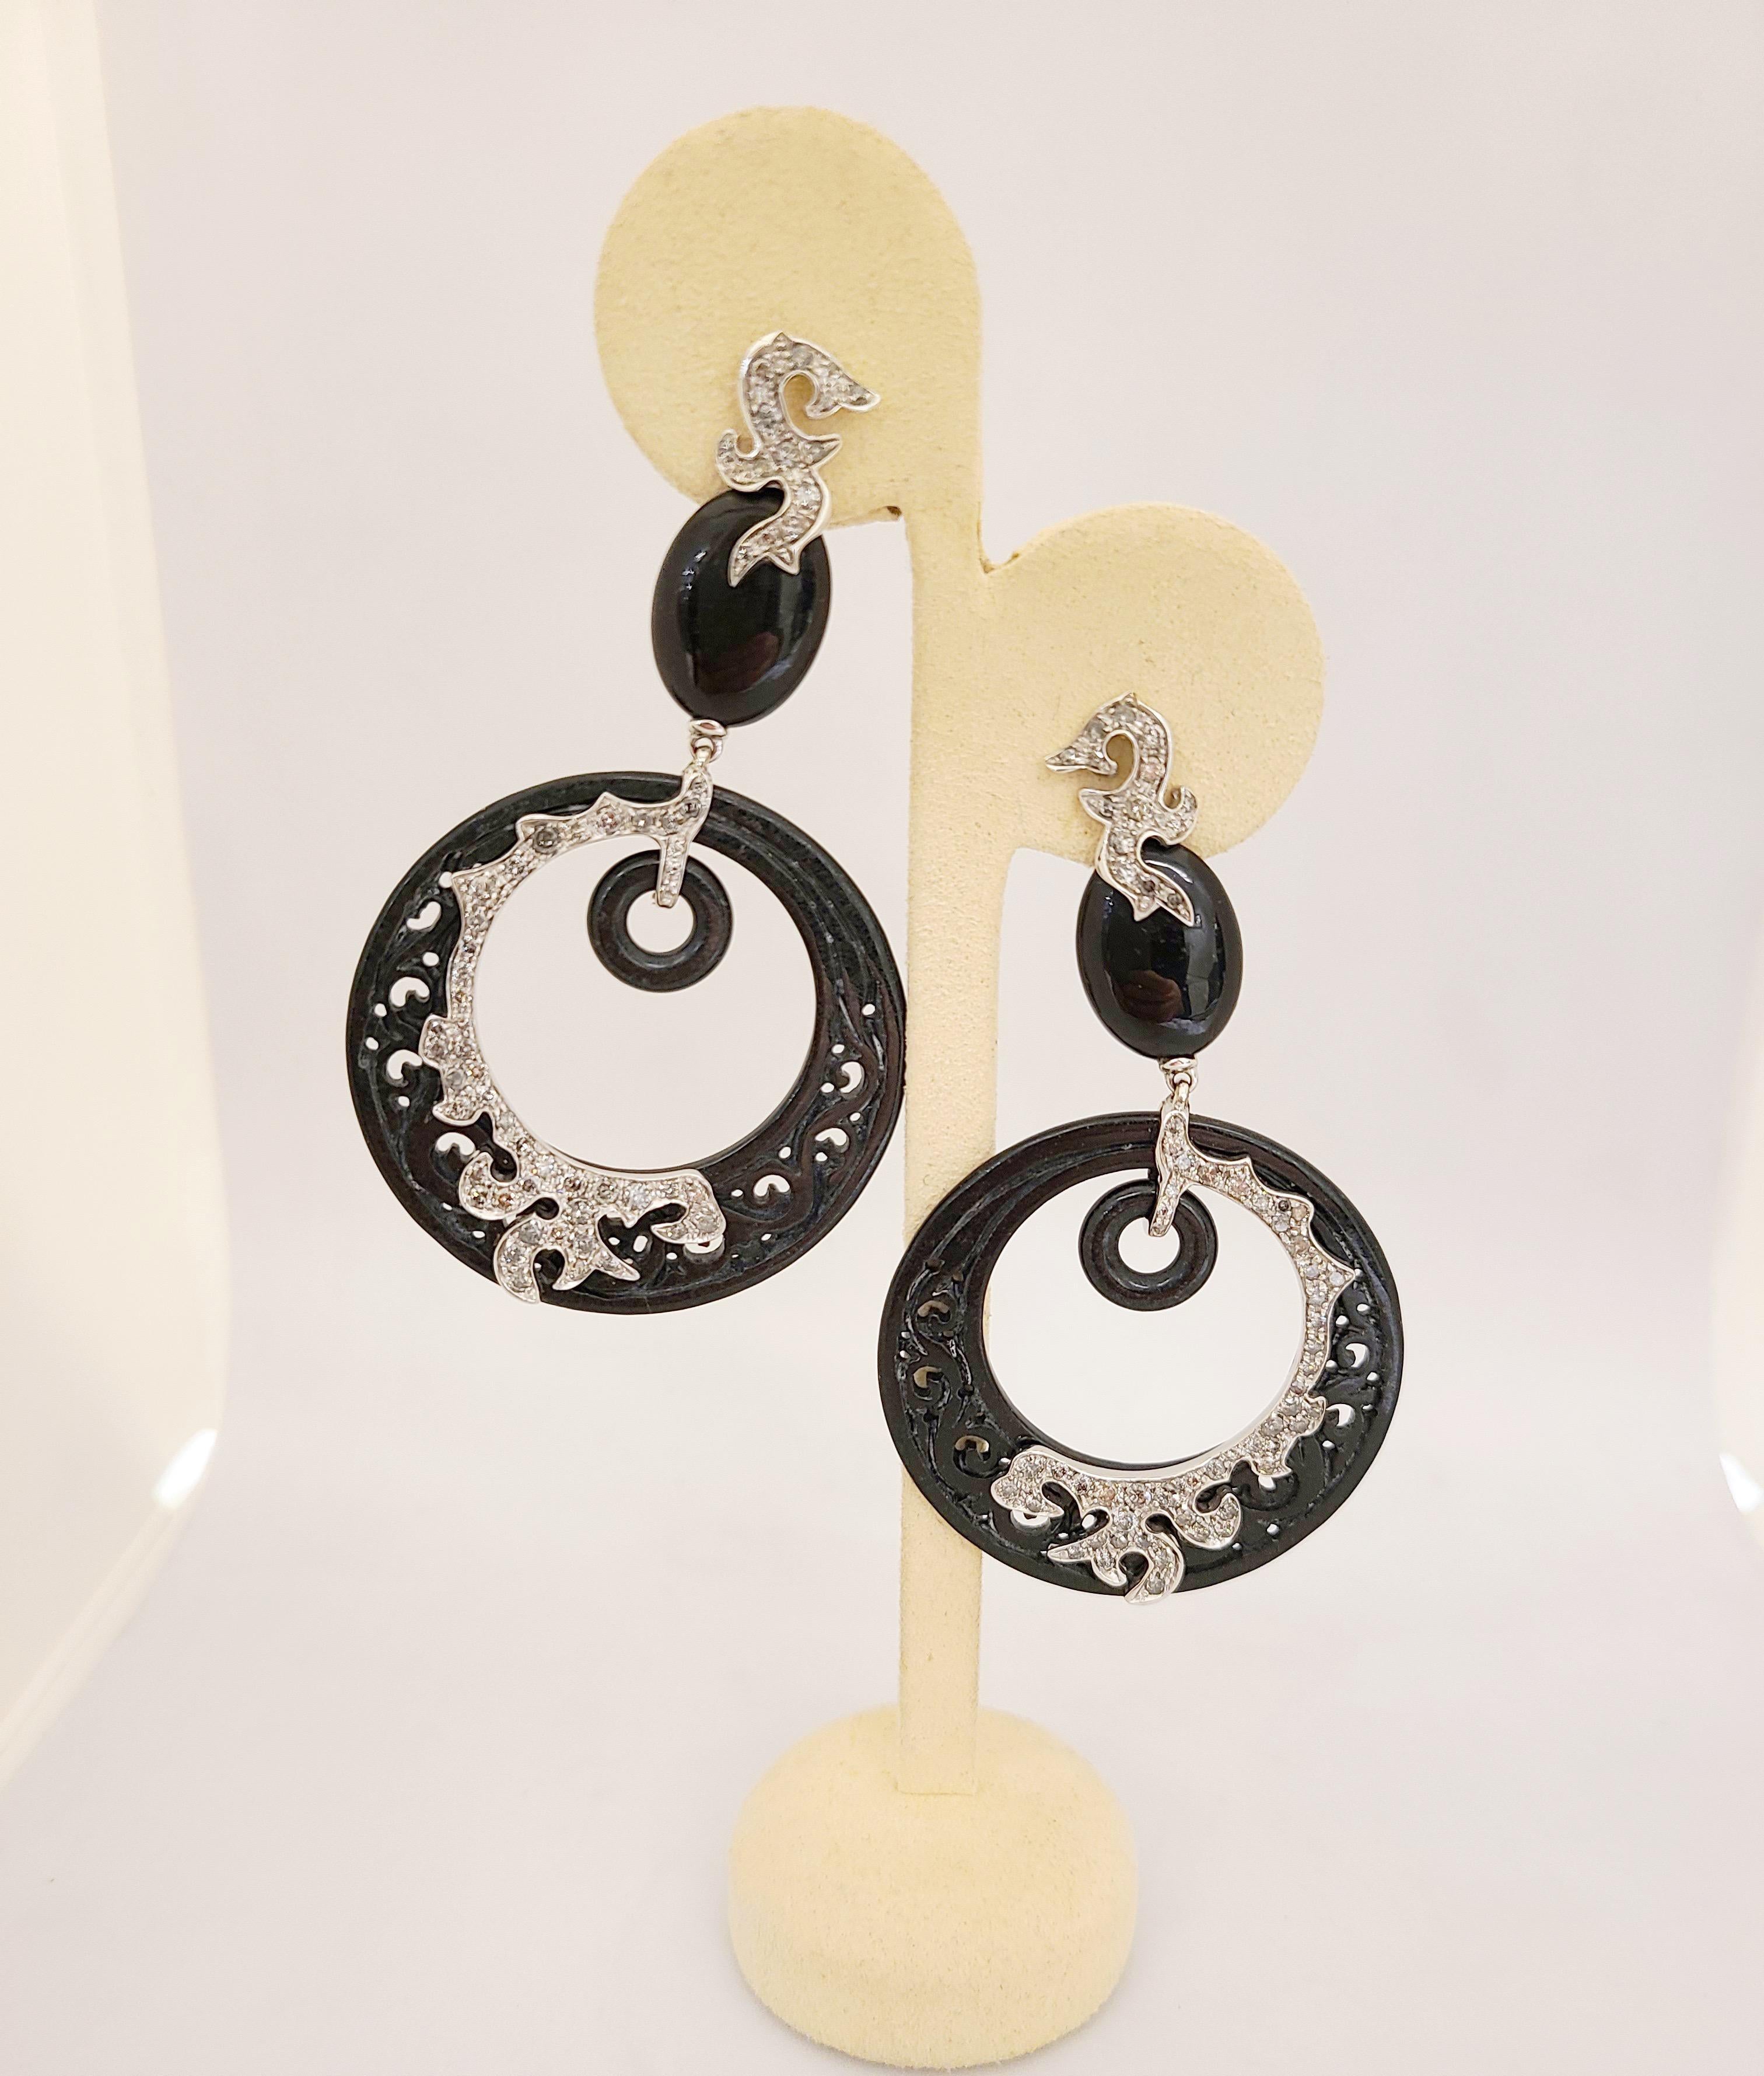 Designed in Italy by Dada Arrigoni these dramatic 18 karat white gold pendant earrings make a bold statement. The earrings feature large black jade circular pendants with hand carved open scroll work. Grey diamonds set in 18 karat white gold are set